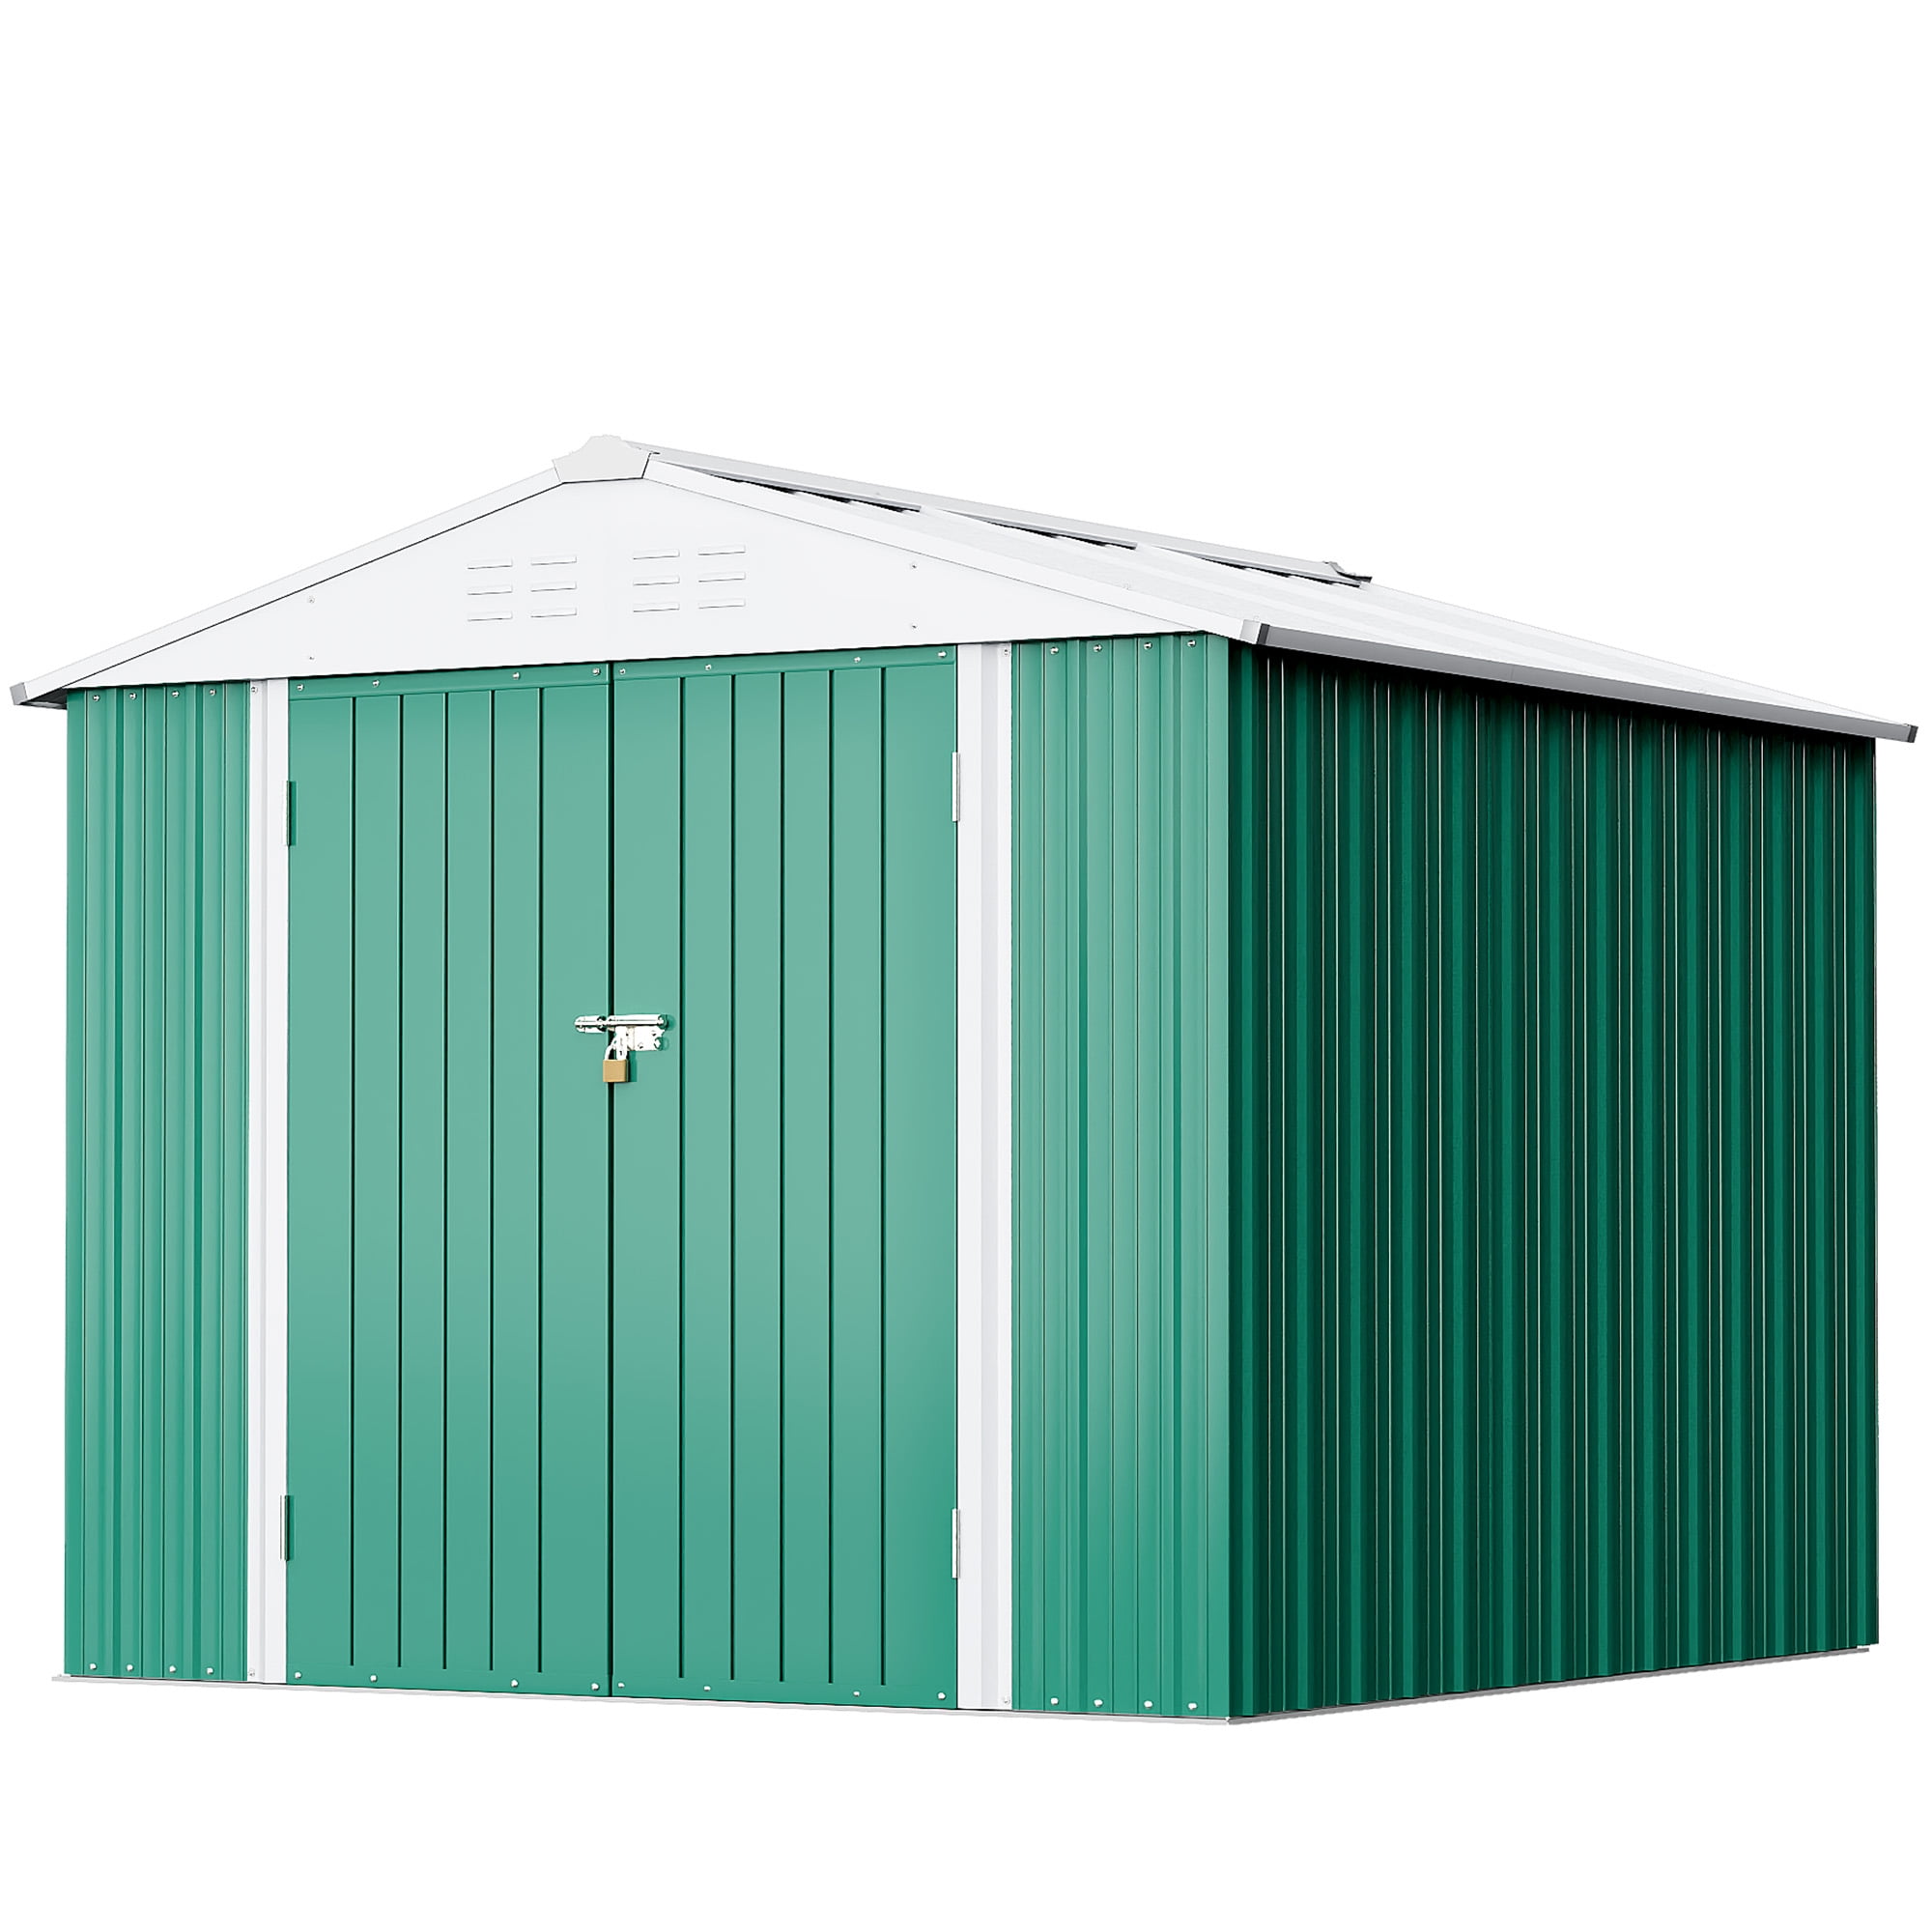 8×6FT Outdoor Storage Shed, Sheds & Outdoor Storage Clearance, Backyard  Metal shed with Lockable Double Doors, can be Used as Bicycle shed, Garden